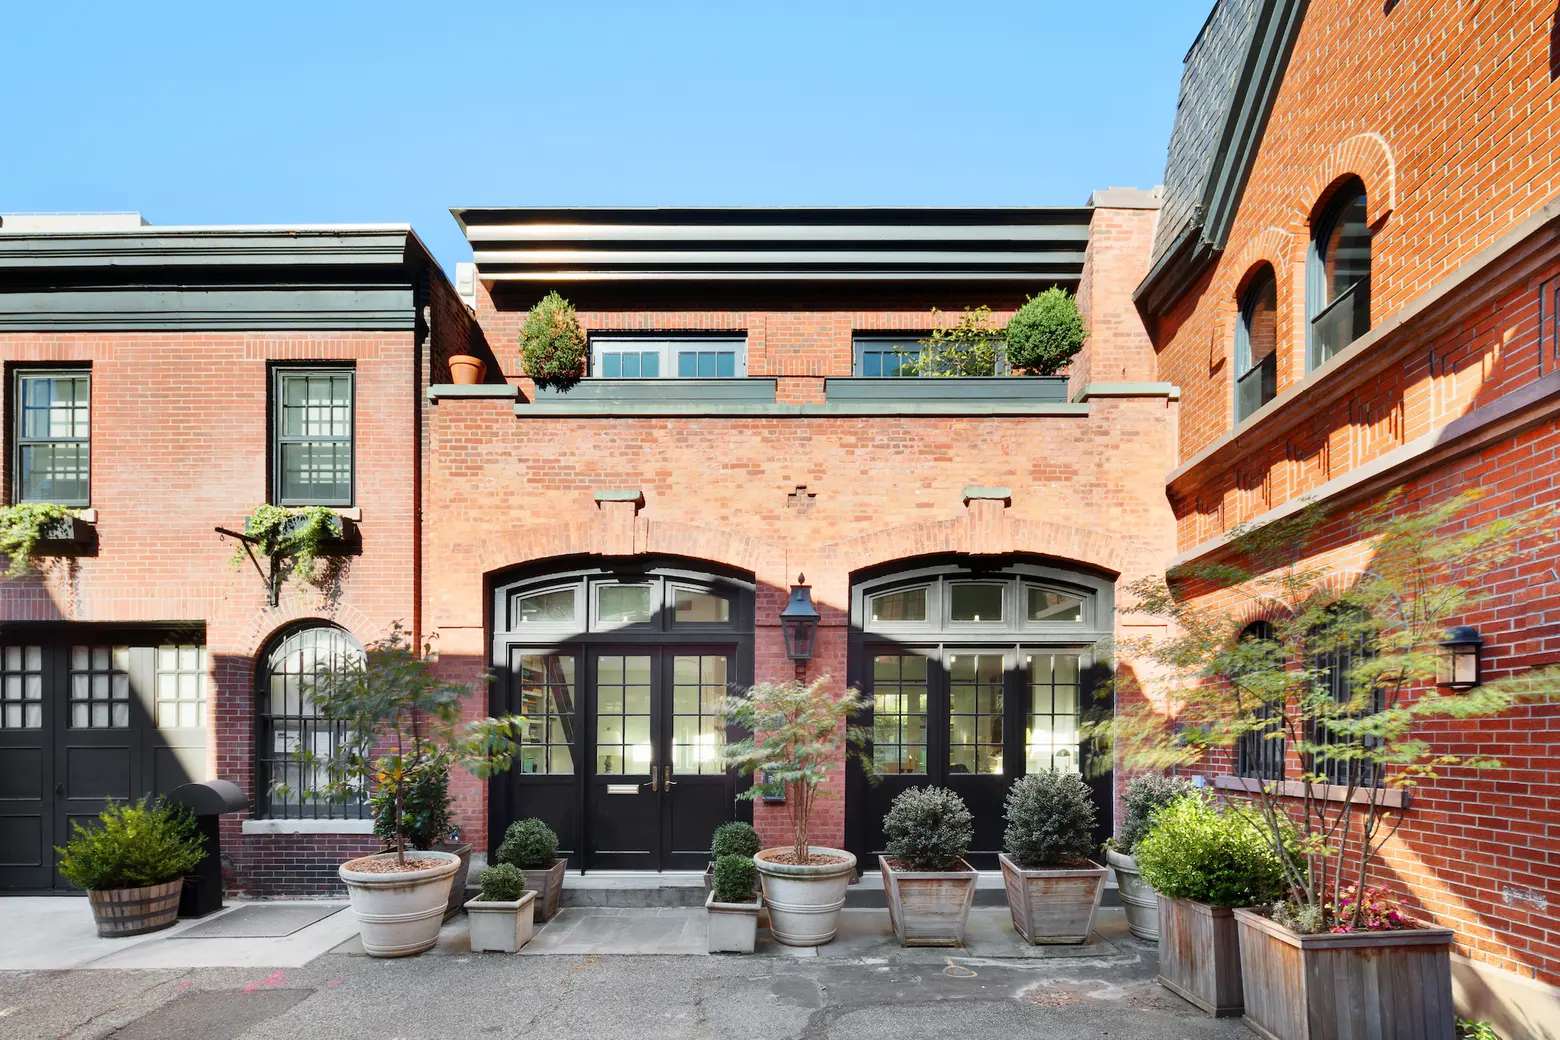 For $4M, a newly renovated Brooklyn Heights carriage house on a car-free cul-de-sac